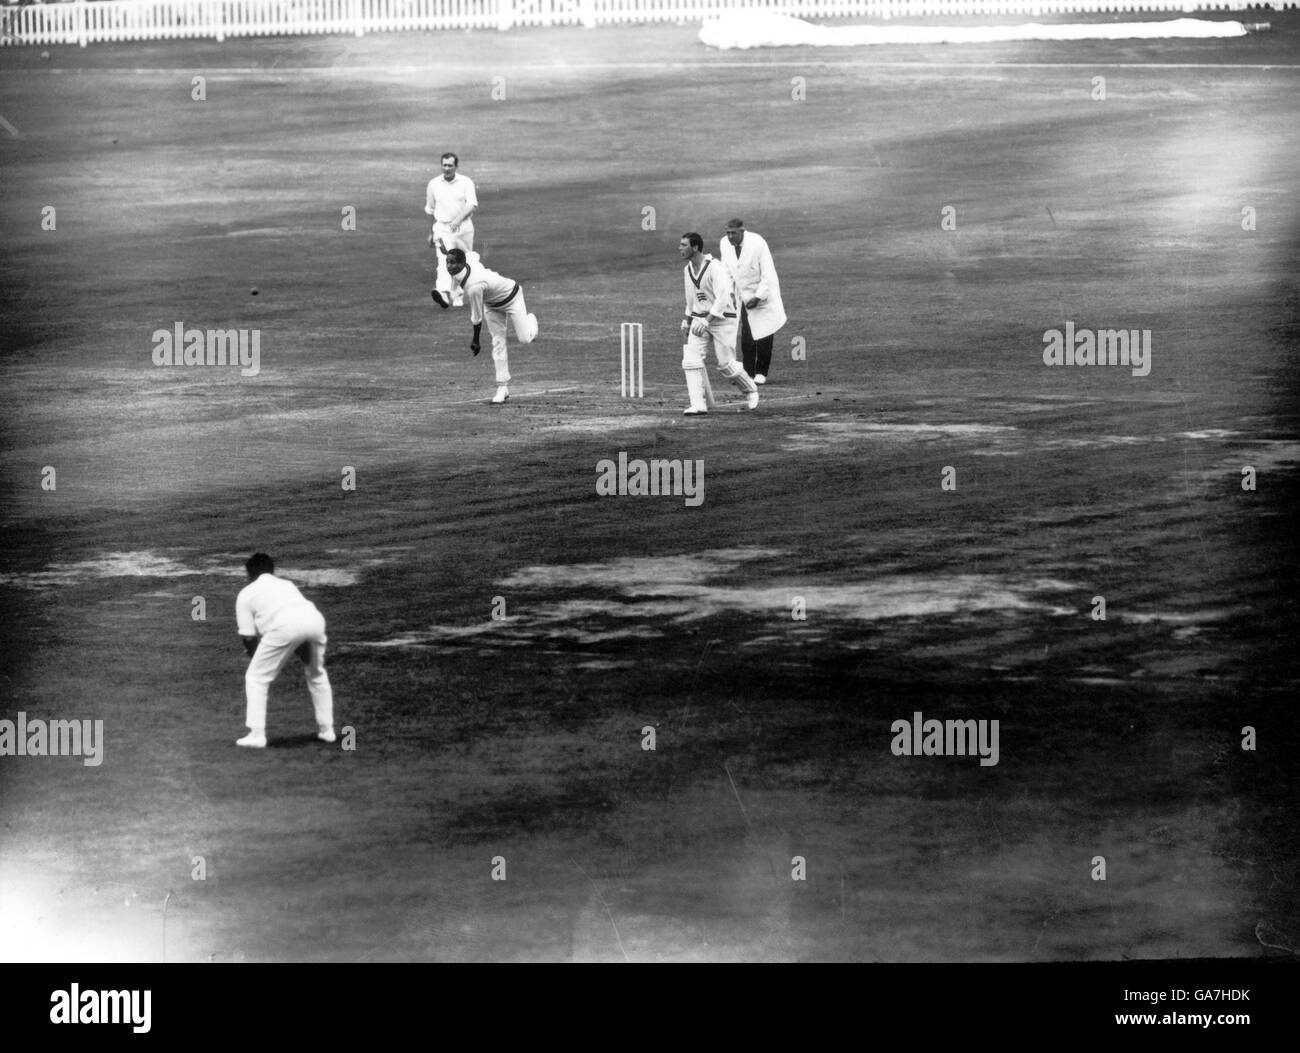 Cricket - Middlesex / International Cavaliers. International Cavaliers Garfield Sobers (c) bowling Banque D'Images